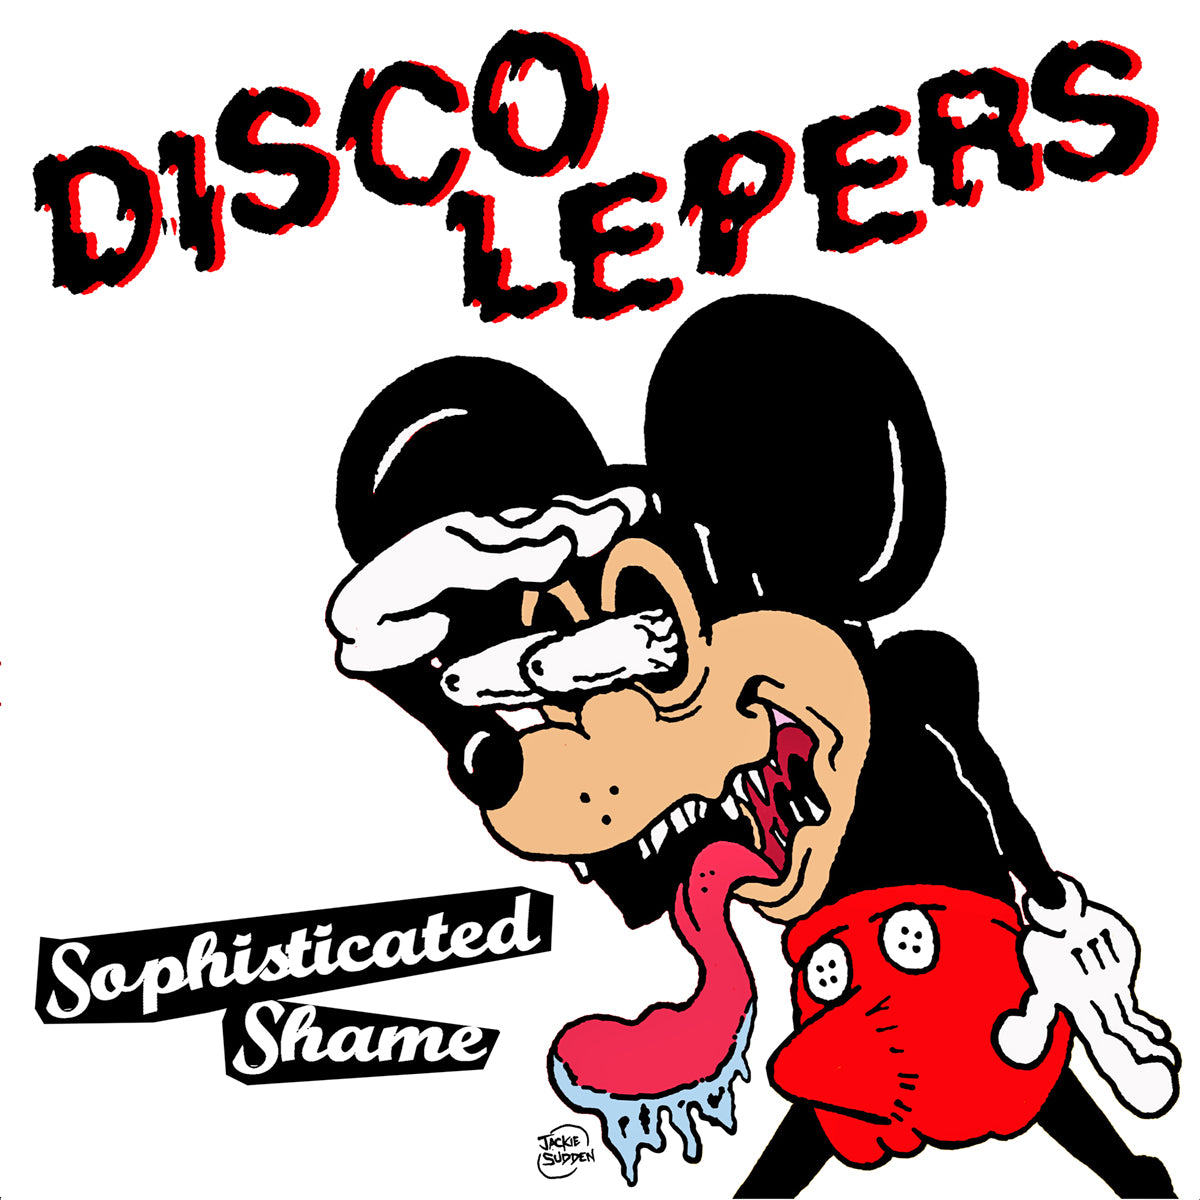 Disco Lepers- Sophisticated Shame LP ~RARE MICKEY COVER LTD TO 25 COPIES WITH POSTER!